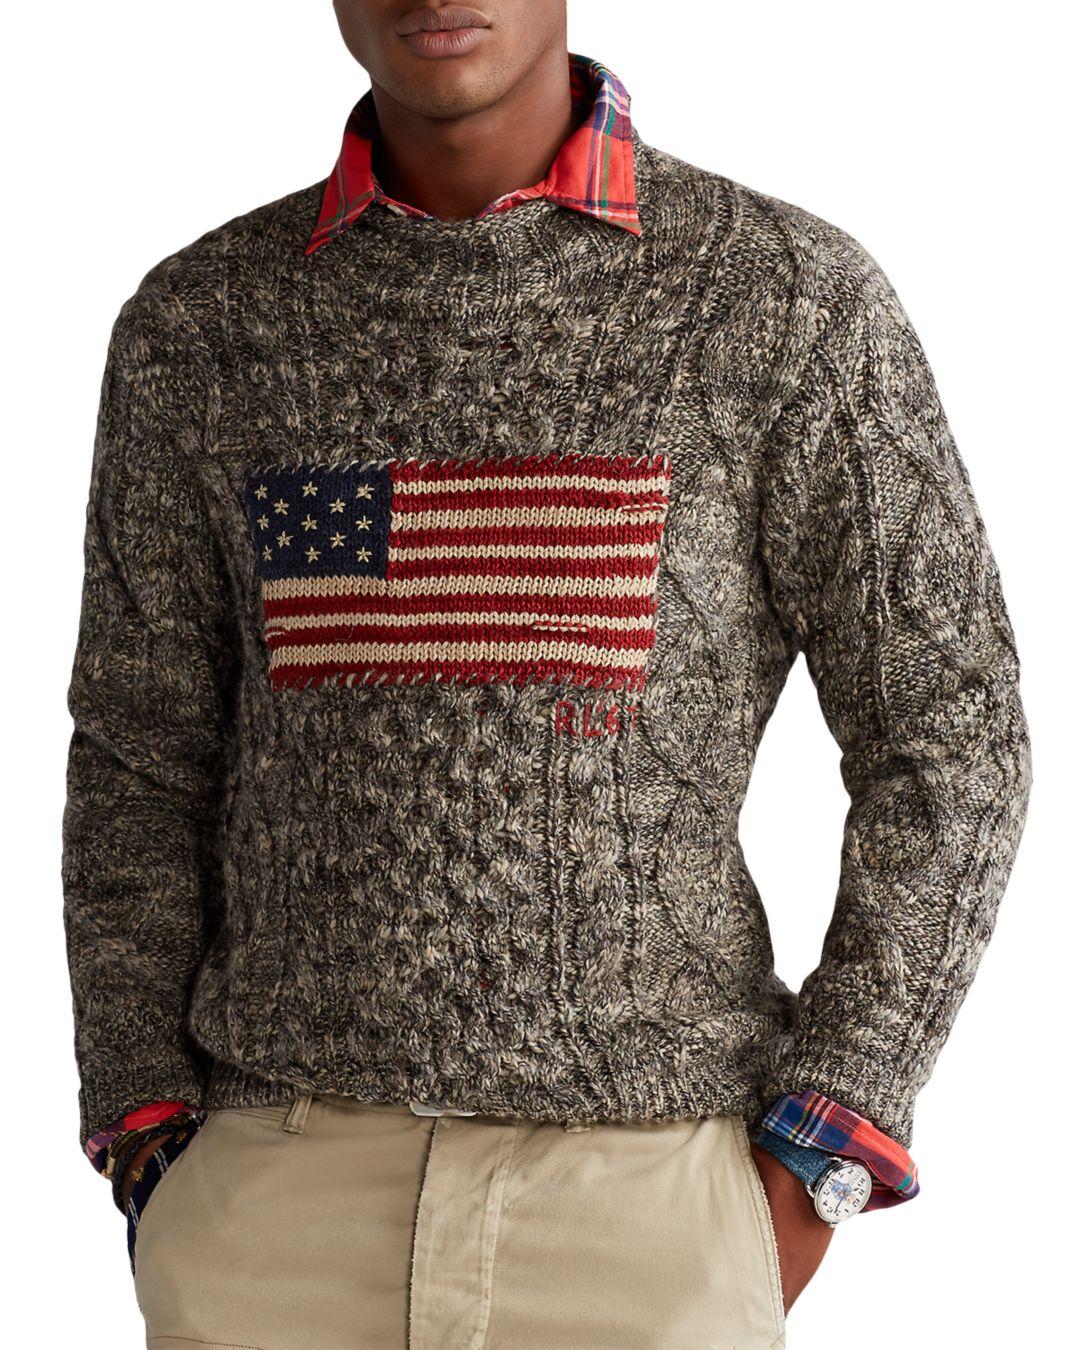 Polo Ralph Lauren Wool American Flag Marled Sweater for Men - Lyst